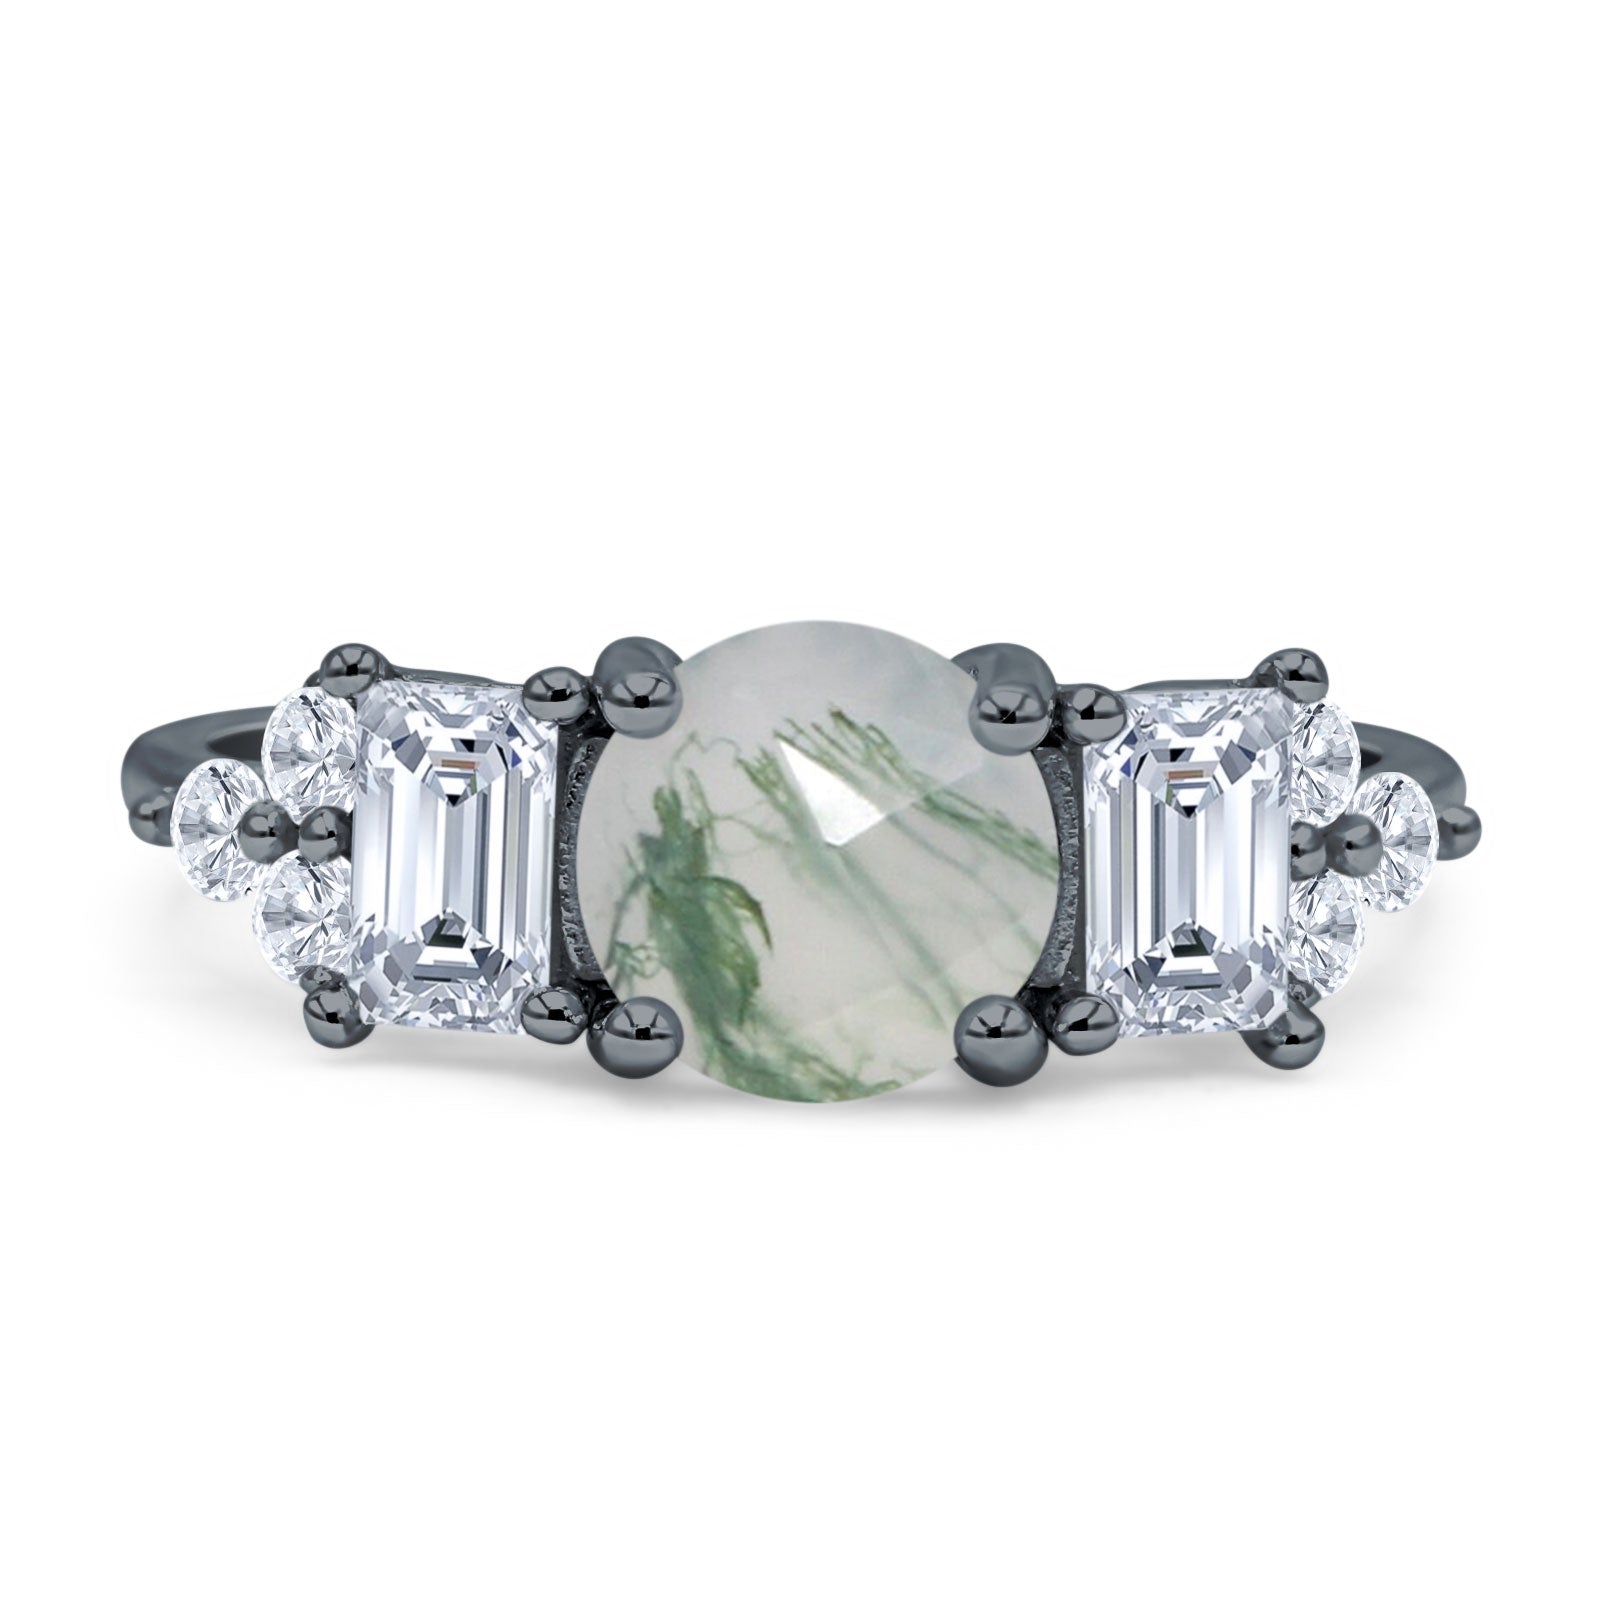 Three Stone Round Natural Green Moss Agate Vintage Style Ring 925 Sterling Silver